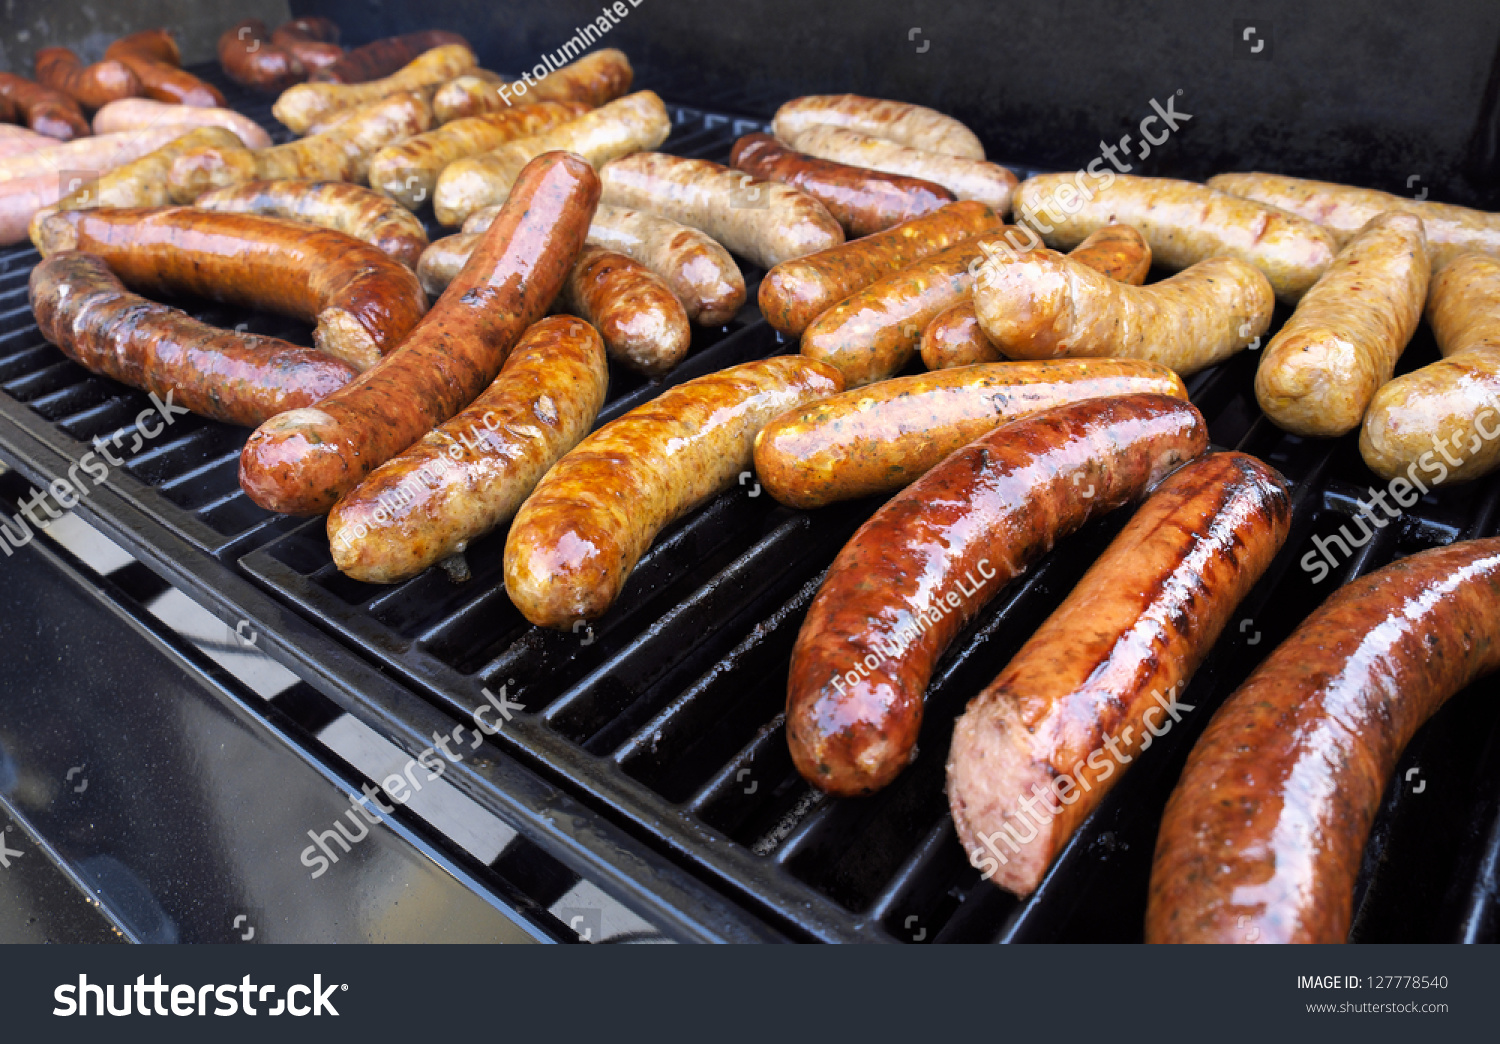 Fresh sausage and hot dogs grilling outdoors on a gas barbecue grill. #127778540